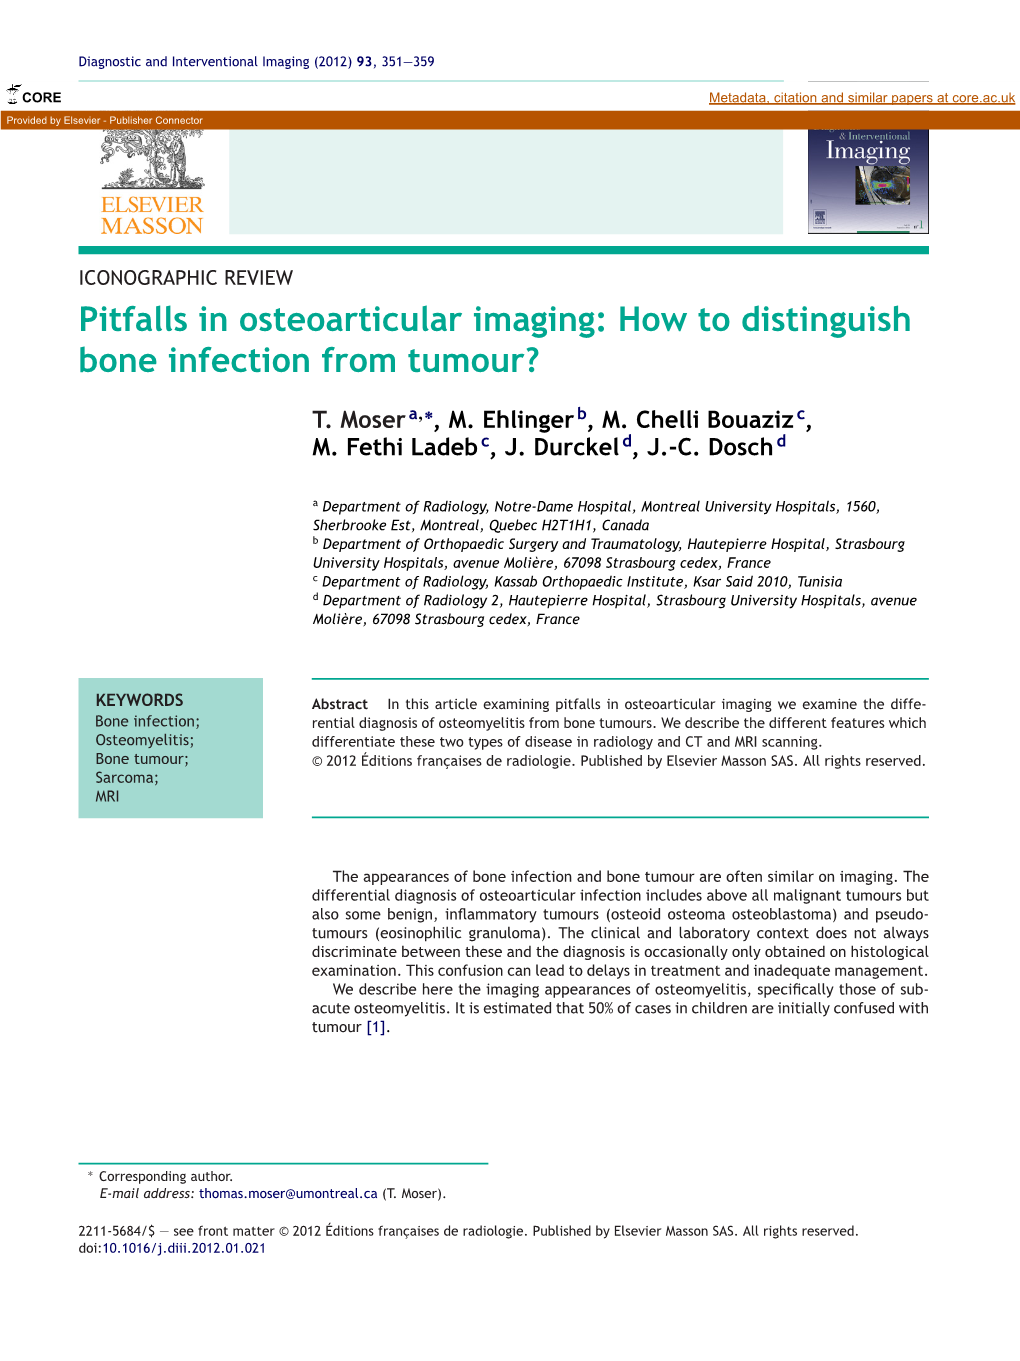 How to Distinguish Bone Infection from Tumour? 353